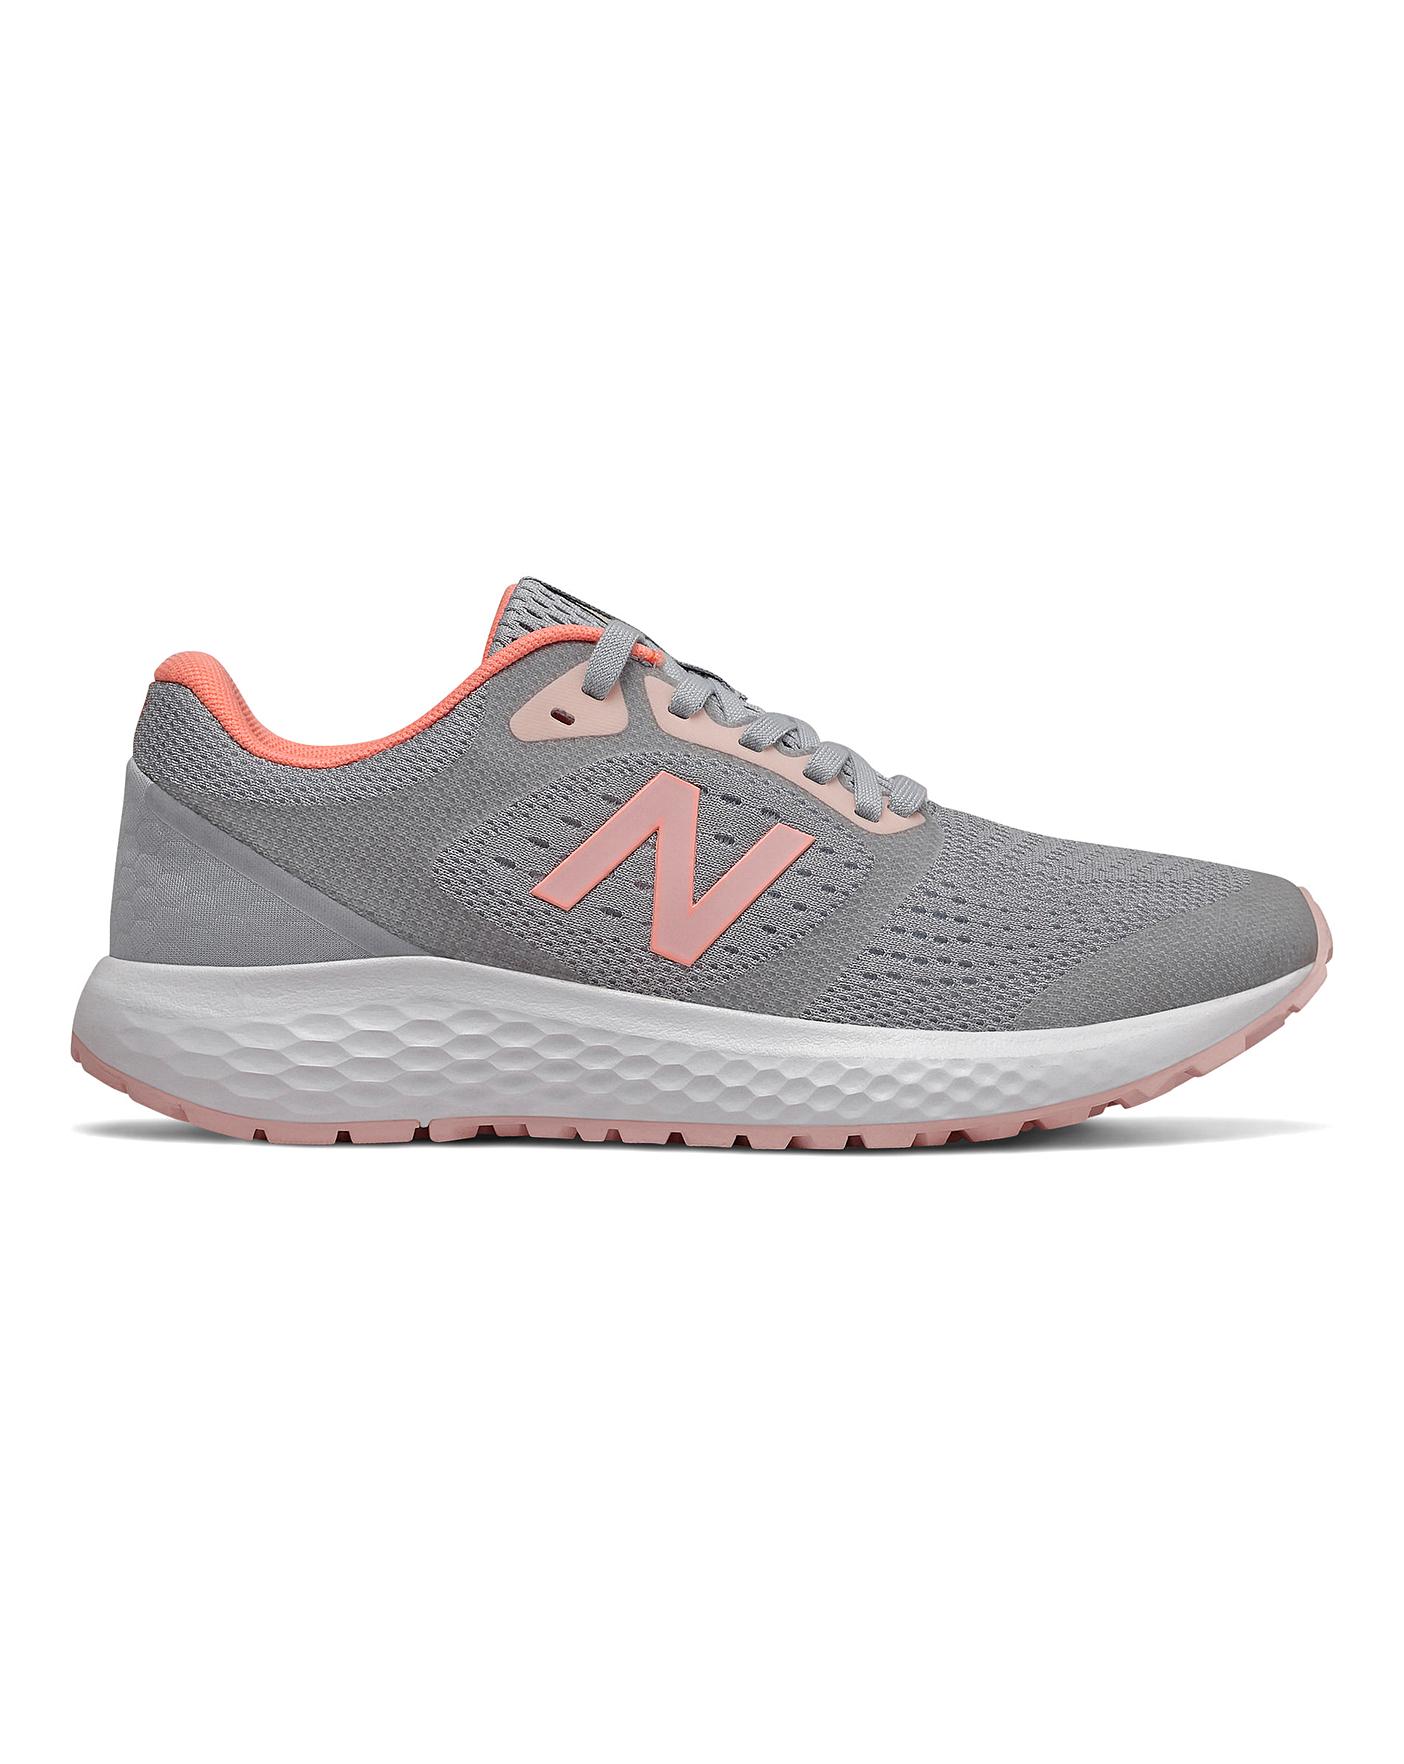 new balance wide trainers, OFF 71%,Best 